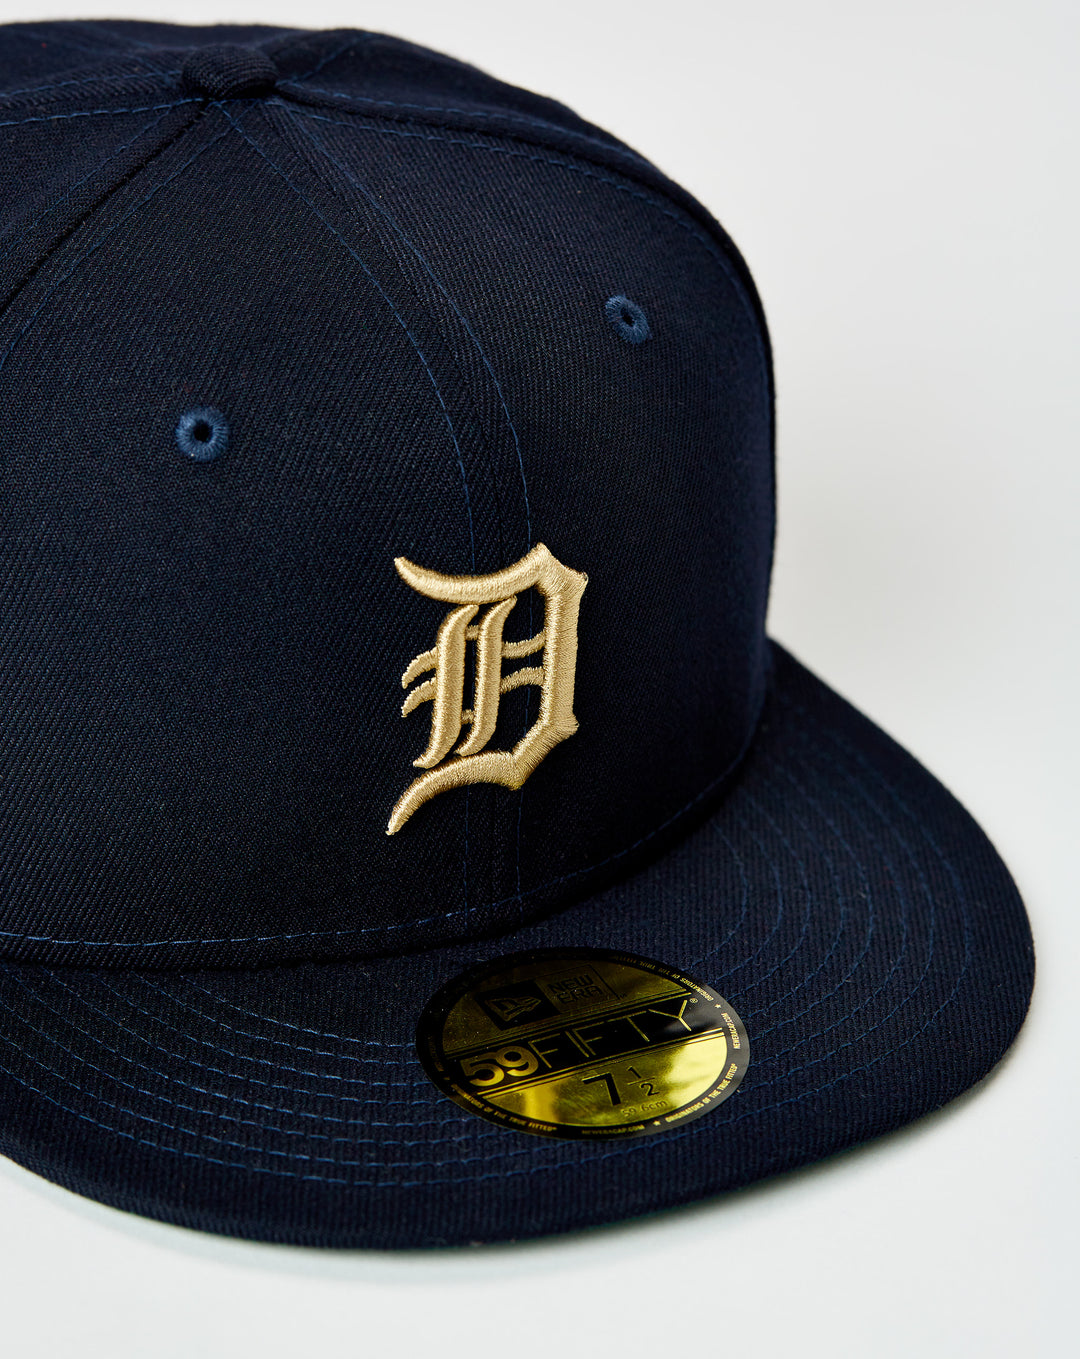 New Era Embroidered team logo at the front  - Cheap Urlfreeze Jordan outlet